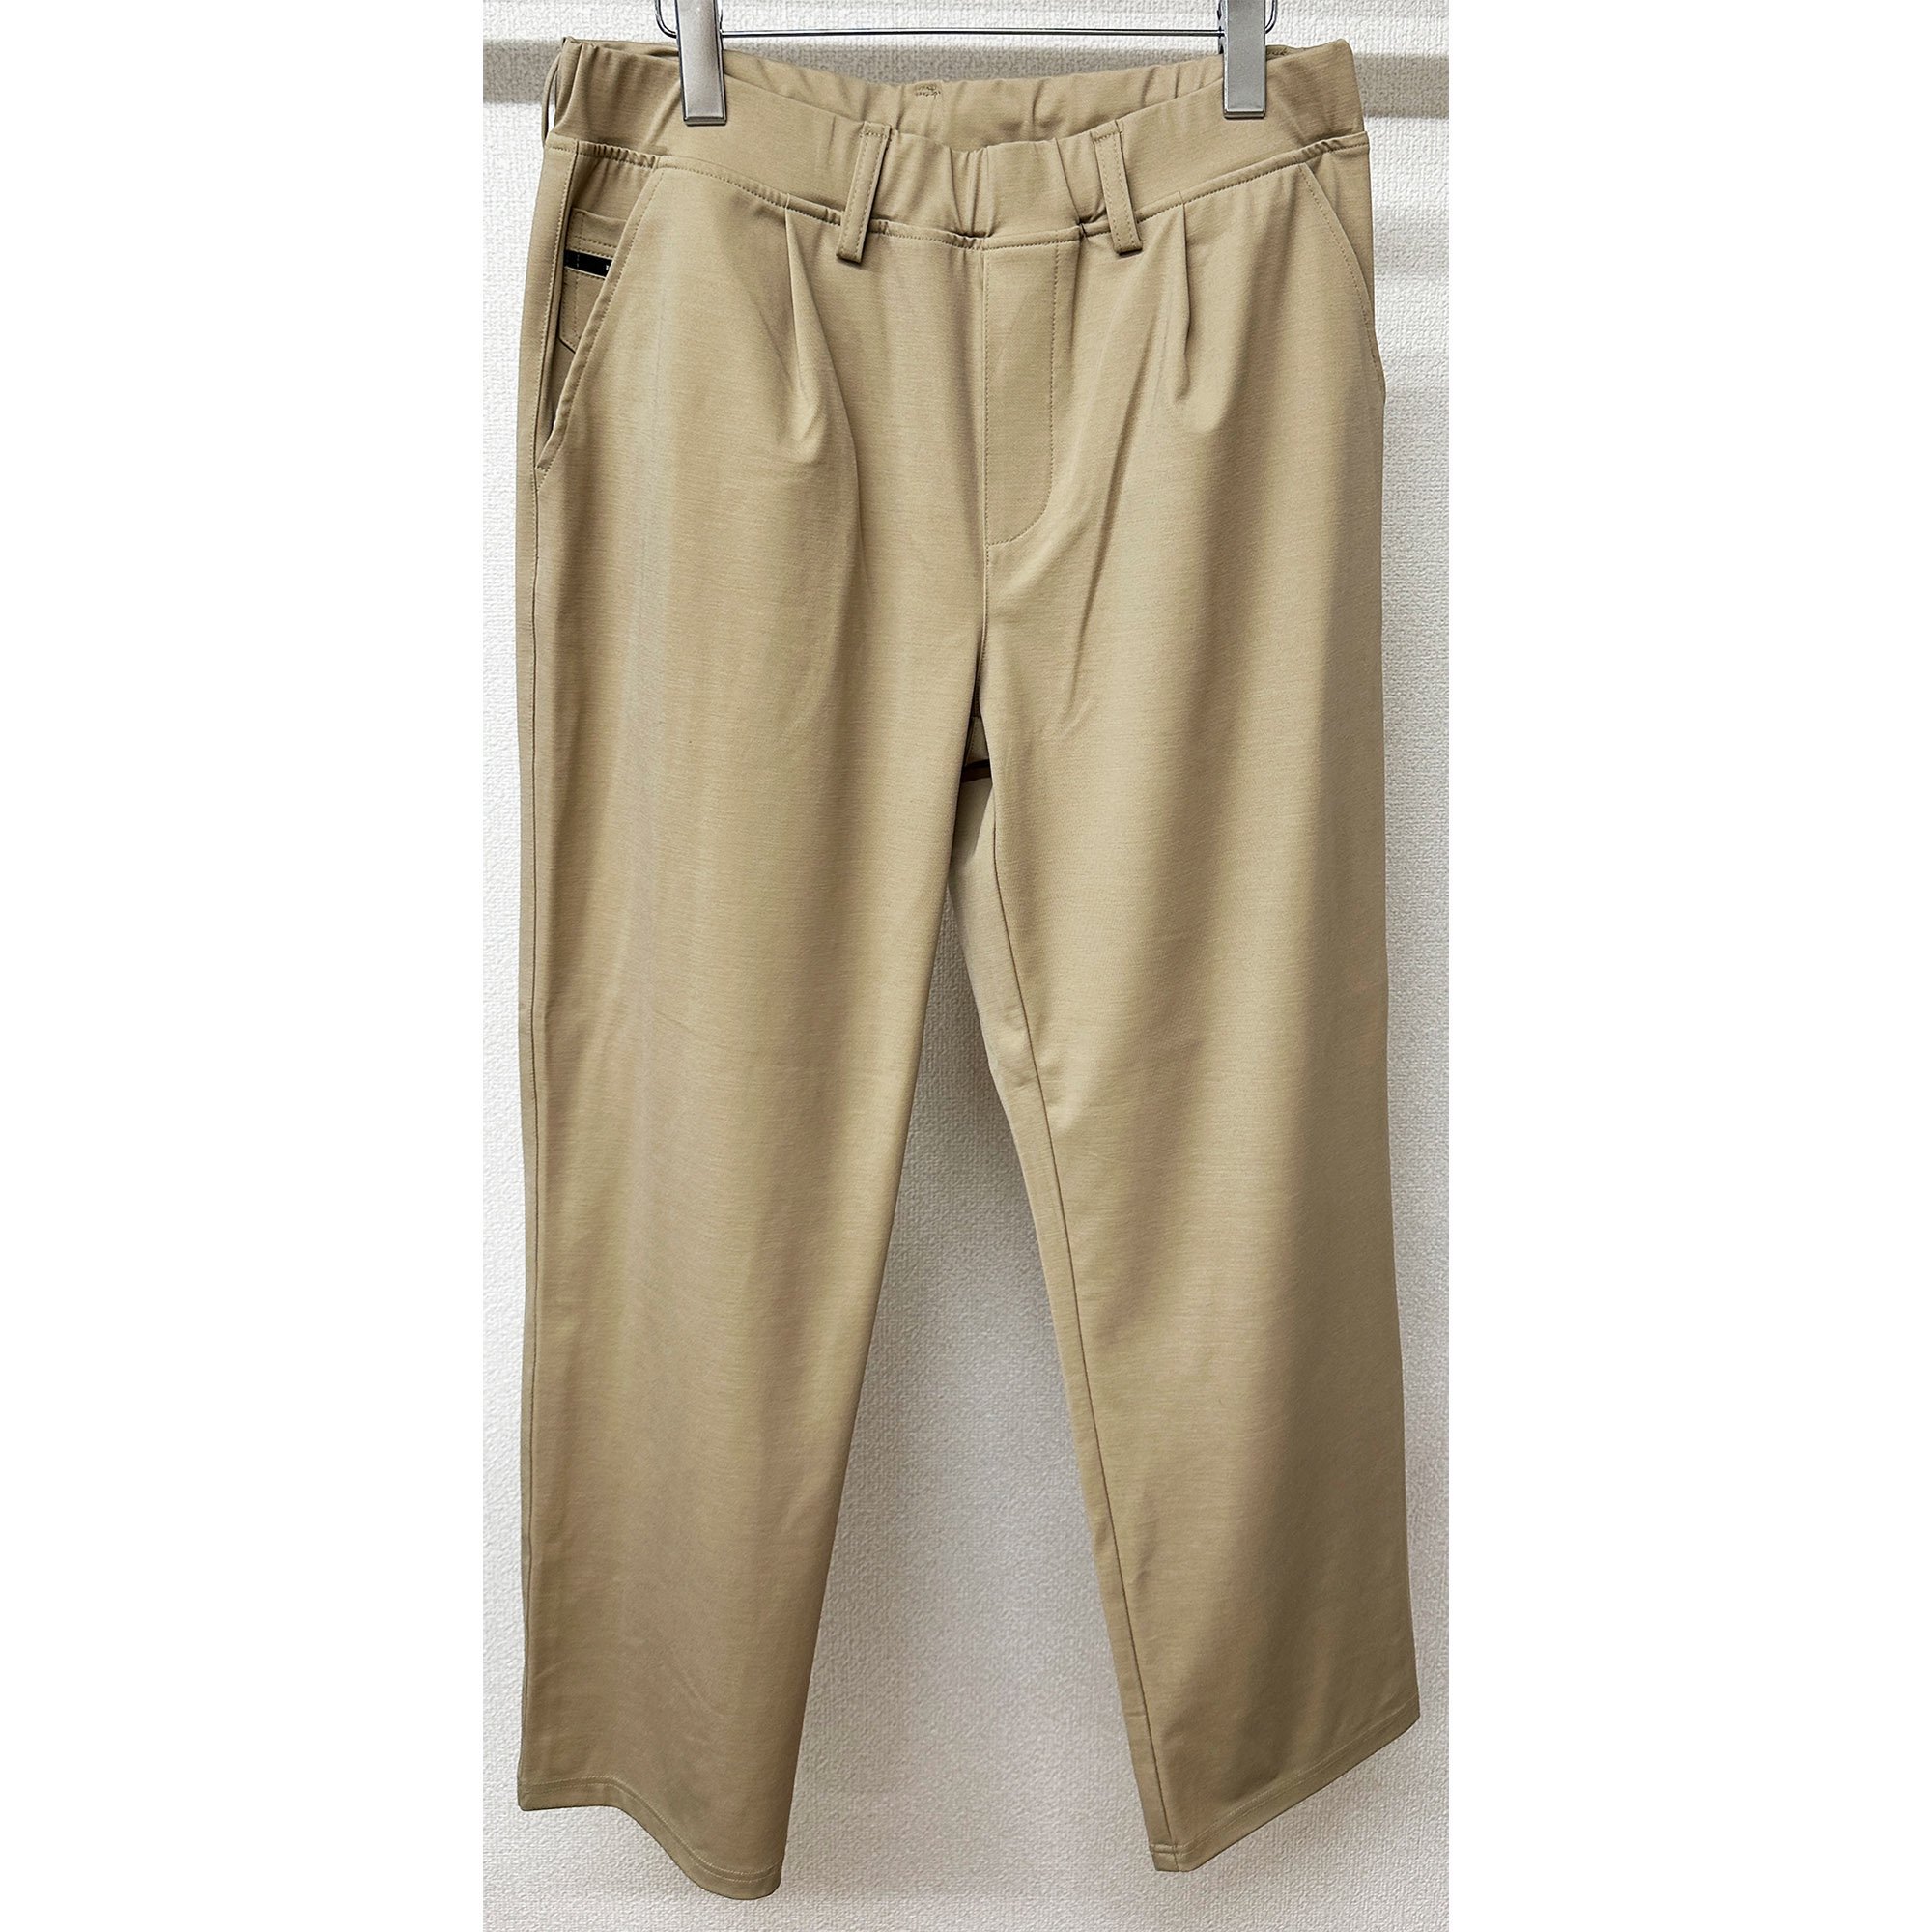 <img class='new_mark_img1' src='https://img.shop-pro.jp/img/new/icons1.gif' style='border:none;display:inline;margin:0px;padding:0px;width:auto;' />CHRIS EASY WIDE TUCK PANTS BEIGE